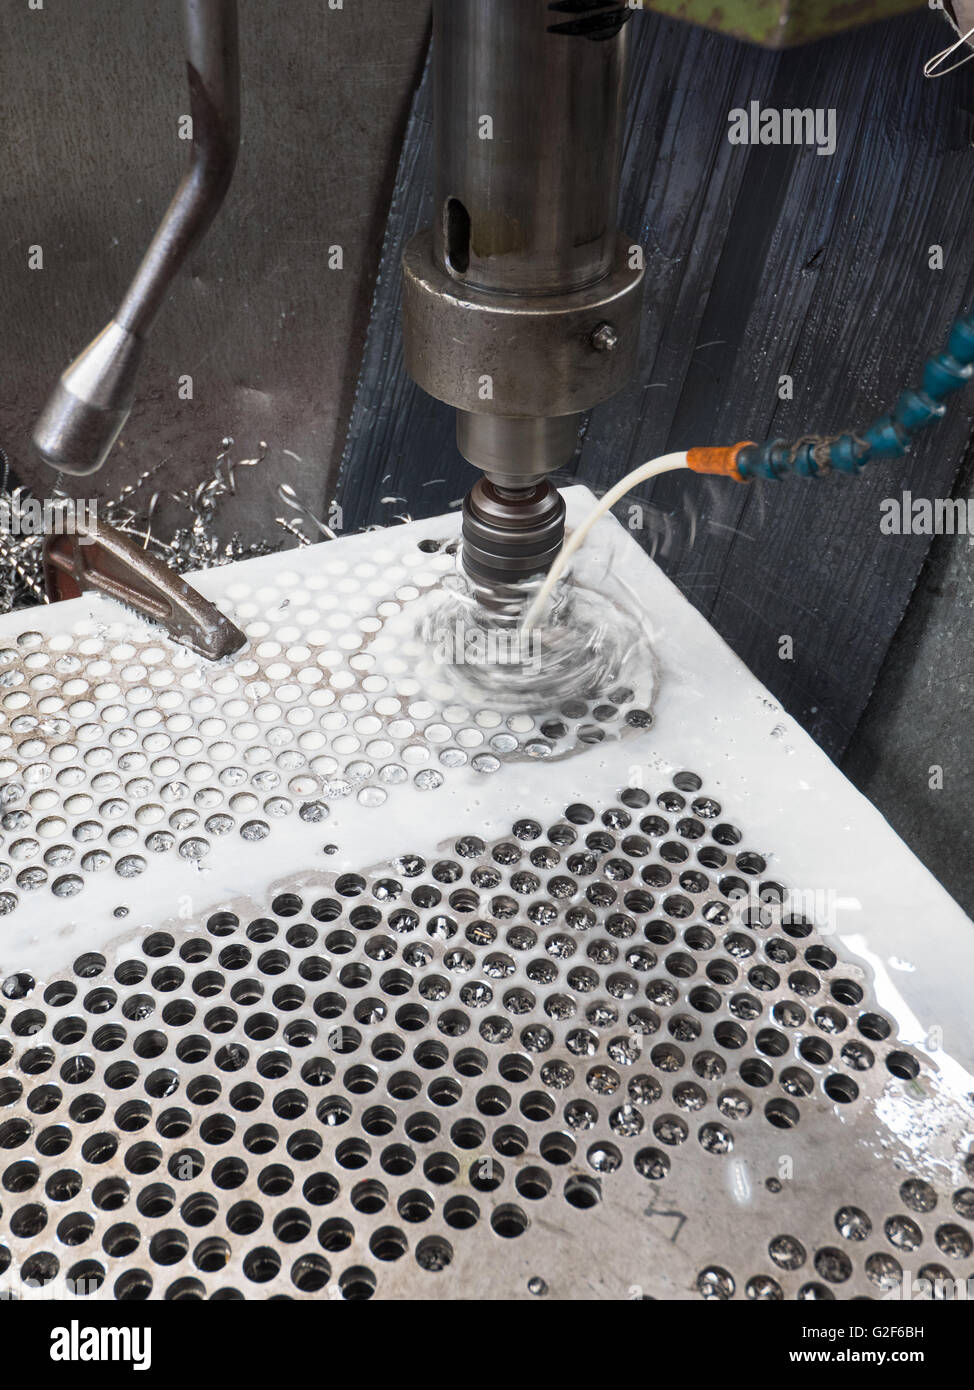 Column drilling machine making holes in a steel plate while being cooled down by cooling liquid. Stock Photo